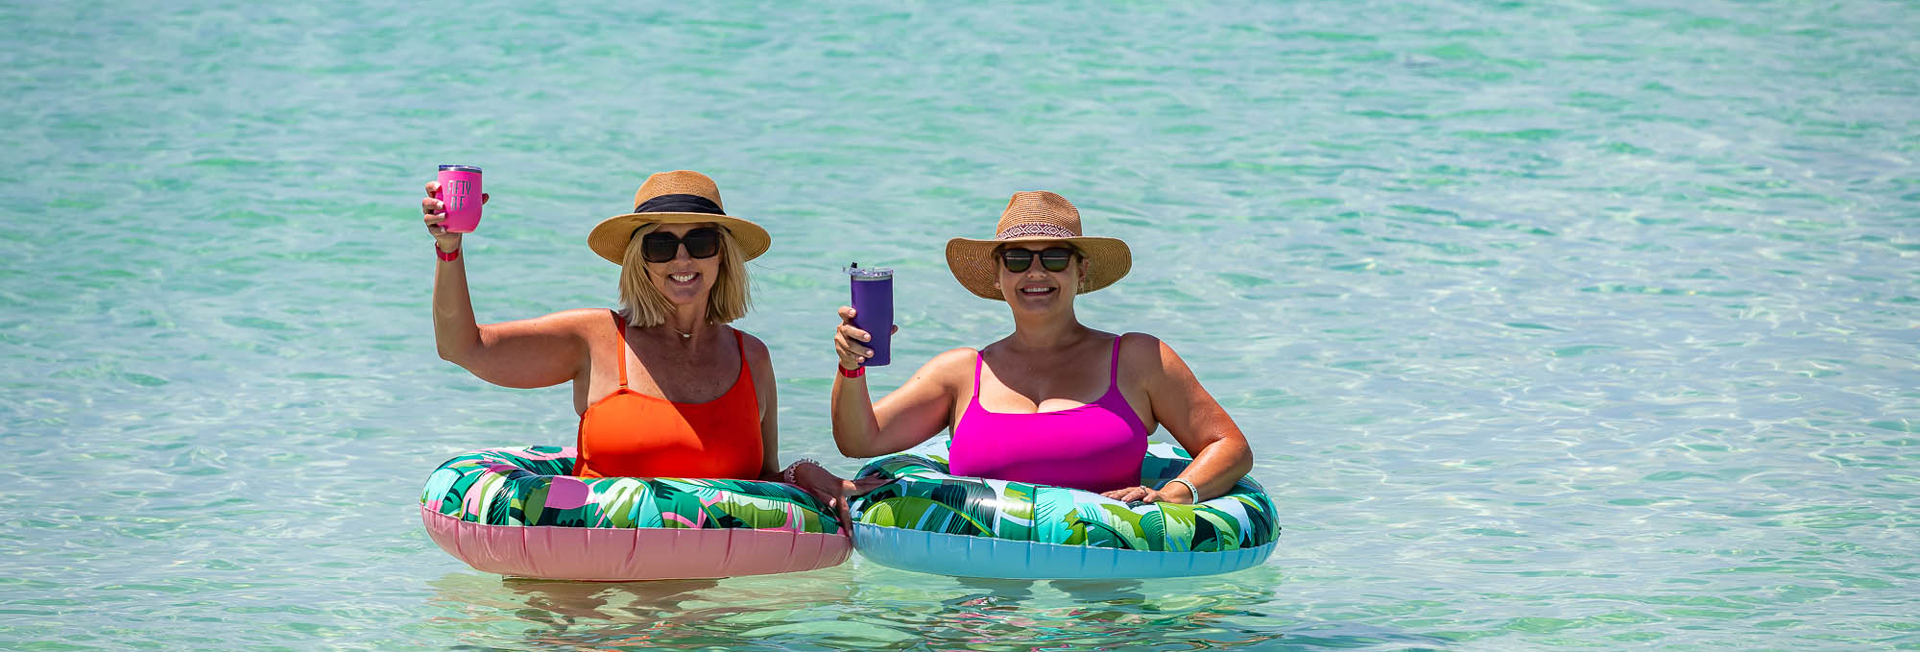 Watersound Club Member ladies enjoying the clear blue gulf waters in bright floats behind the Beach Club